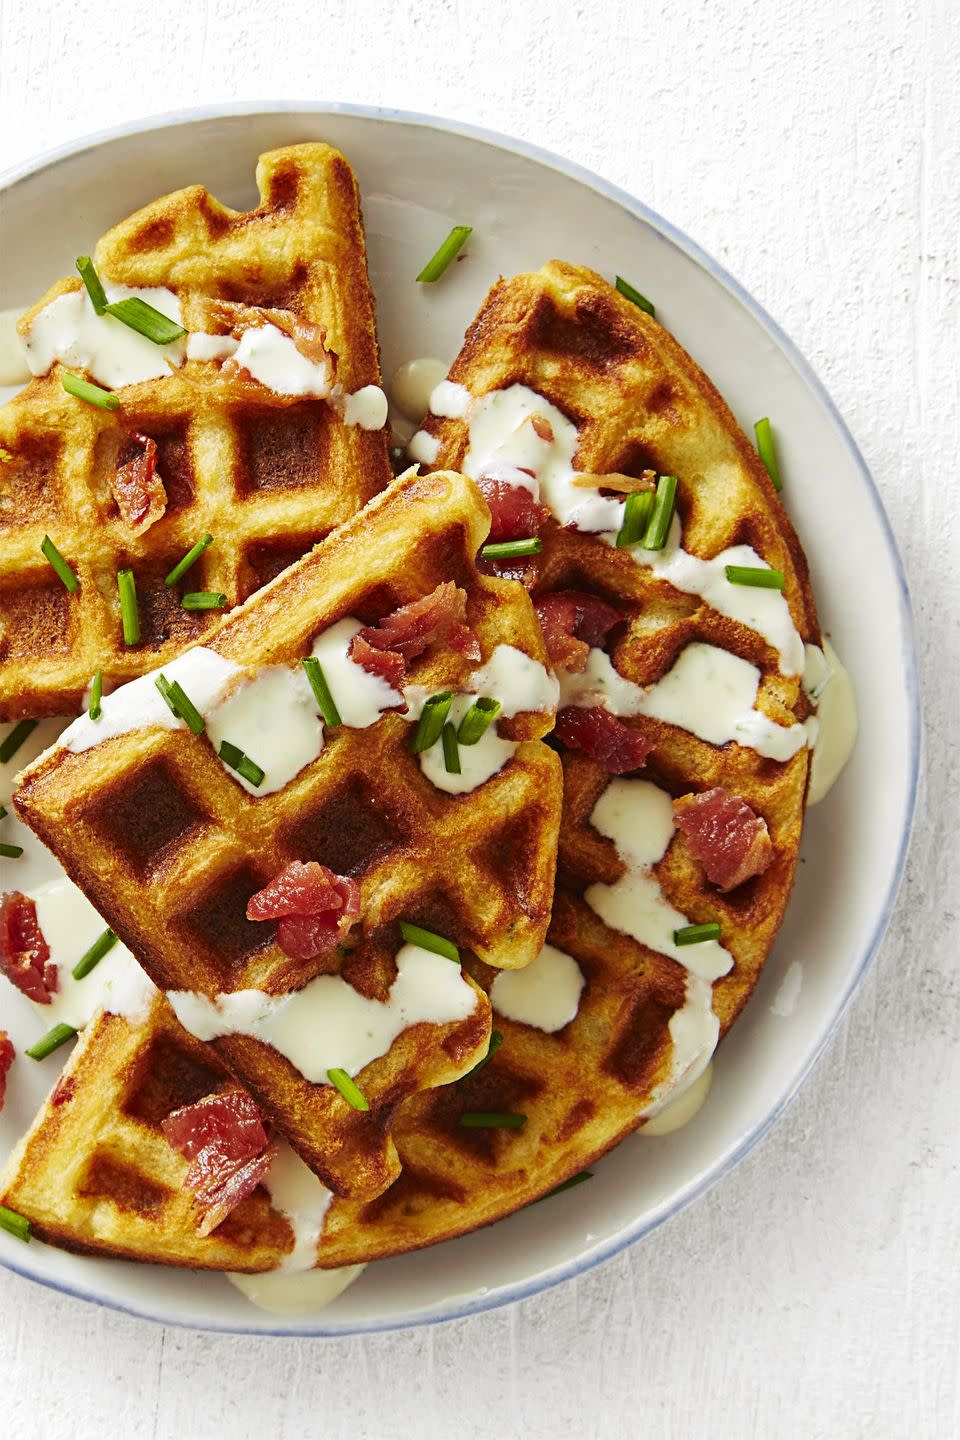 Savory Bacon and Chive Waffles